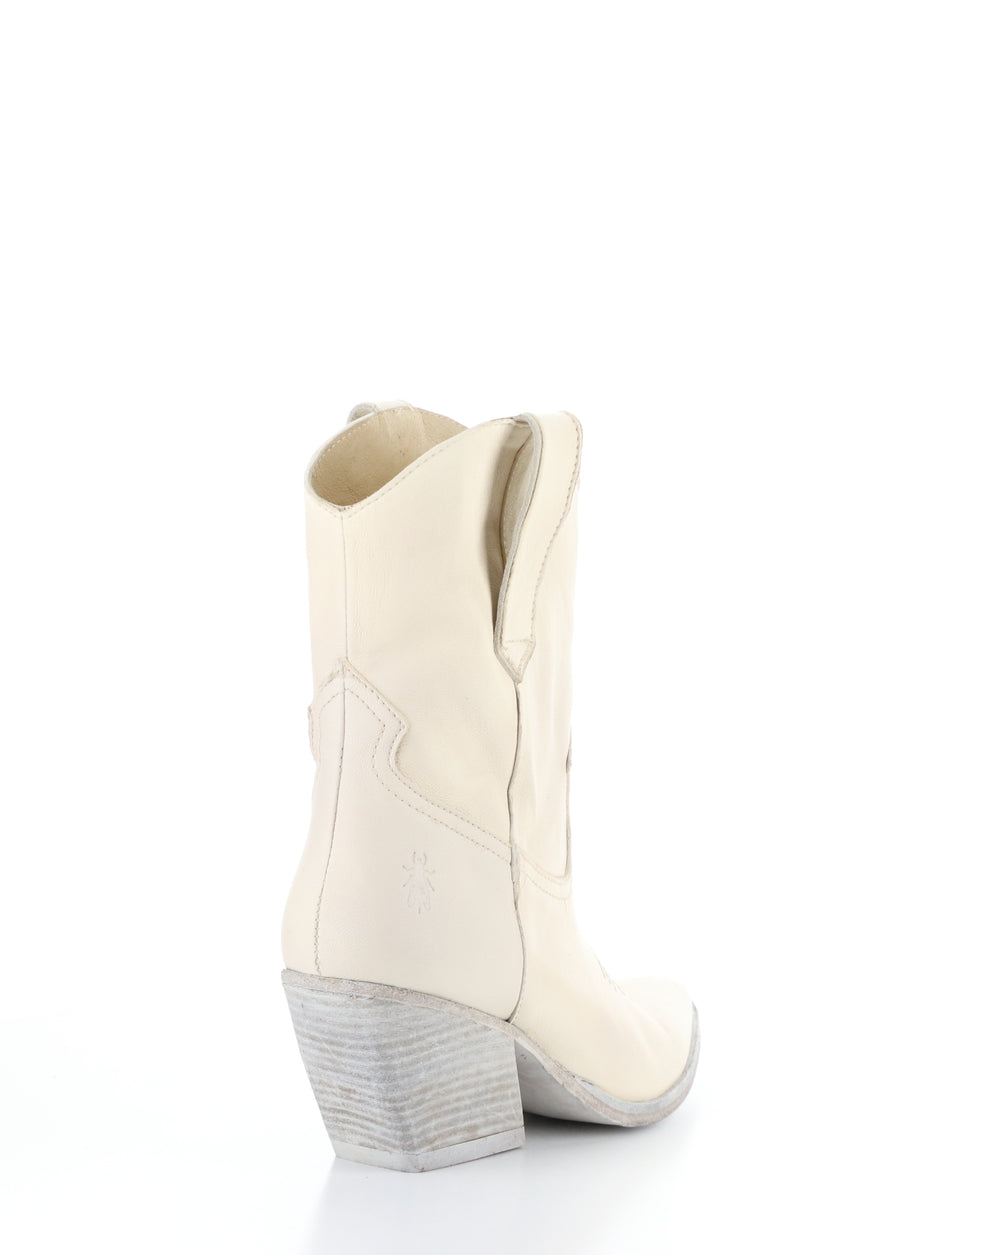 WOFY093FLY 000 OFF WHITE Cowboy Boots